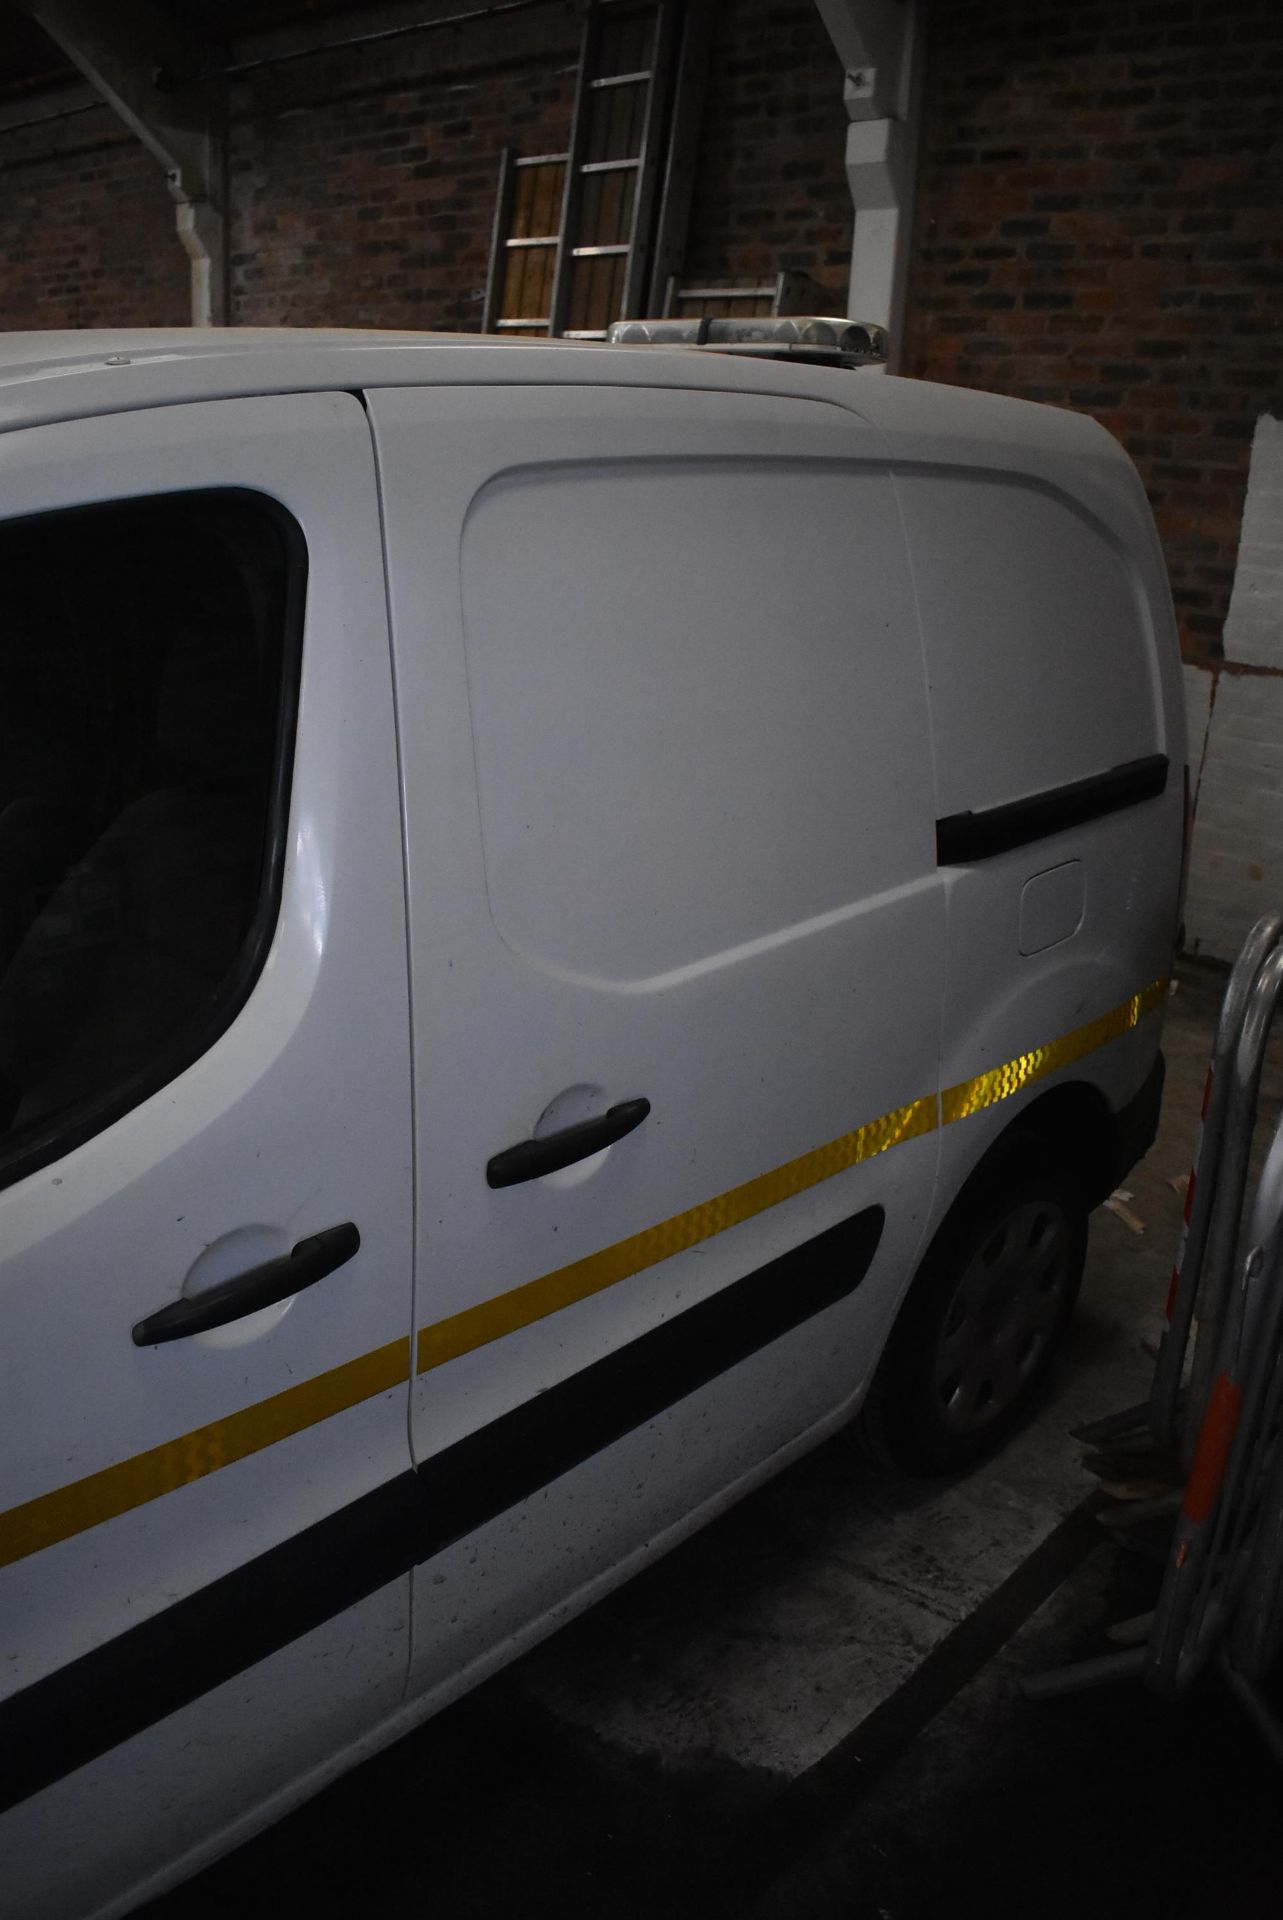 Peugeot PARTNER 850 S L1 HDI PANEL VAN, registration no. CE14 YZF, date first registered 08/04/2014, - Image 10 of 10